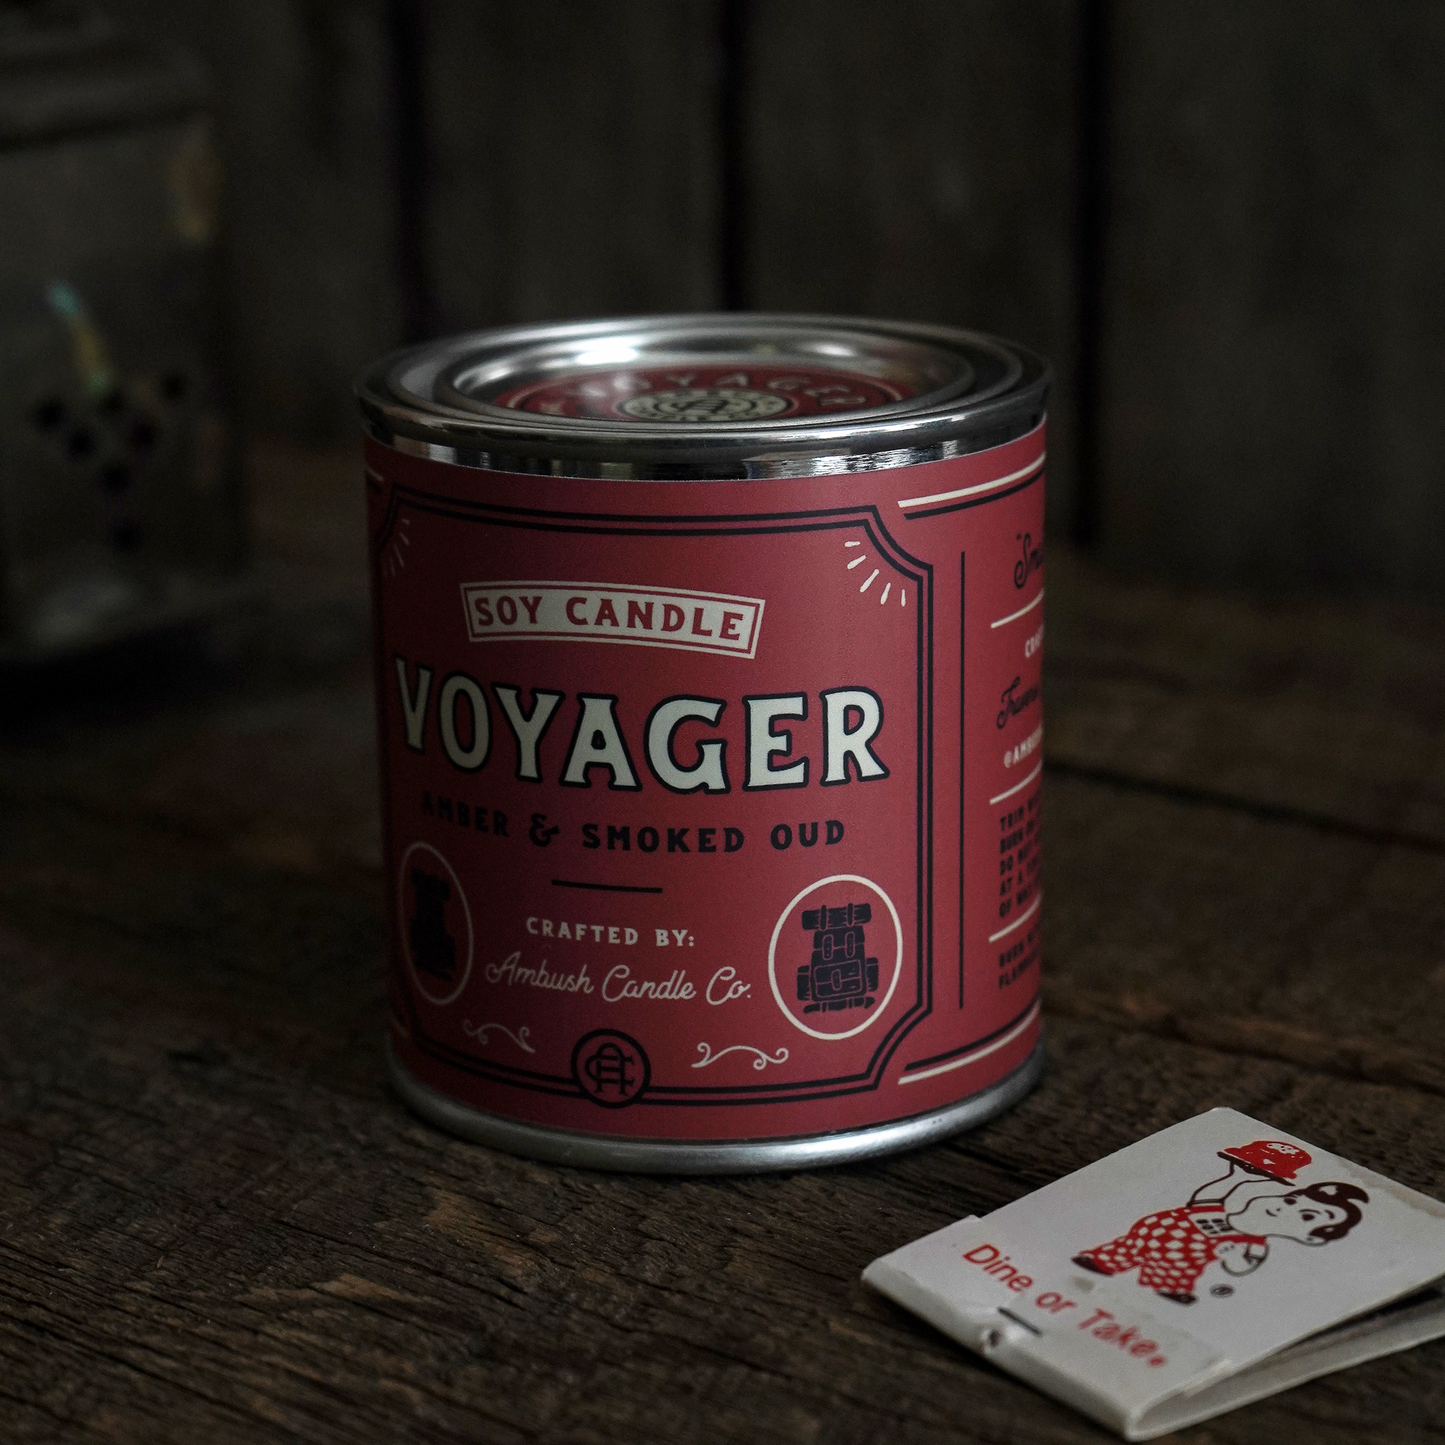 Ambush Candle Co. - Voyager | Amber + Smoked Oud 8oz Soy Candle